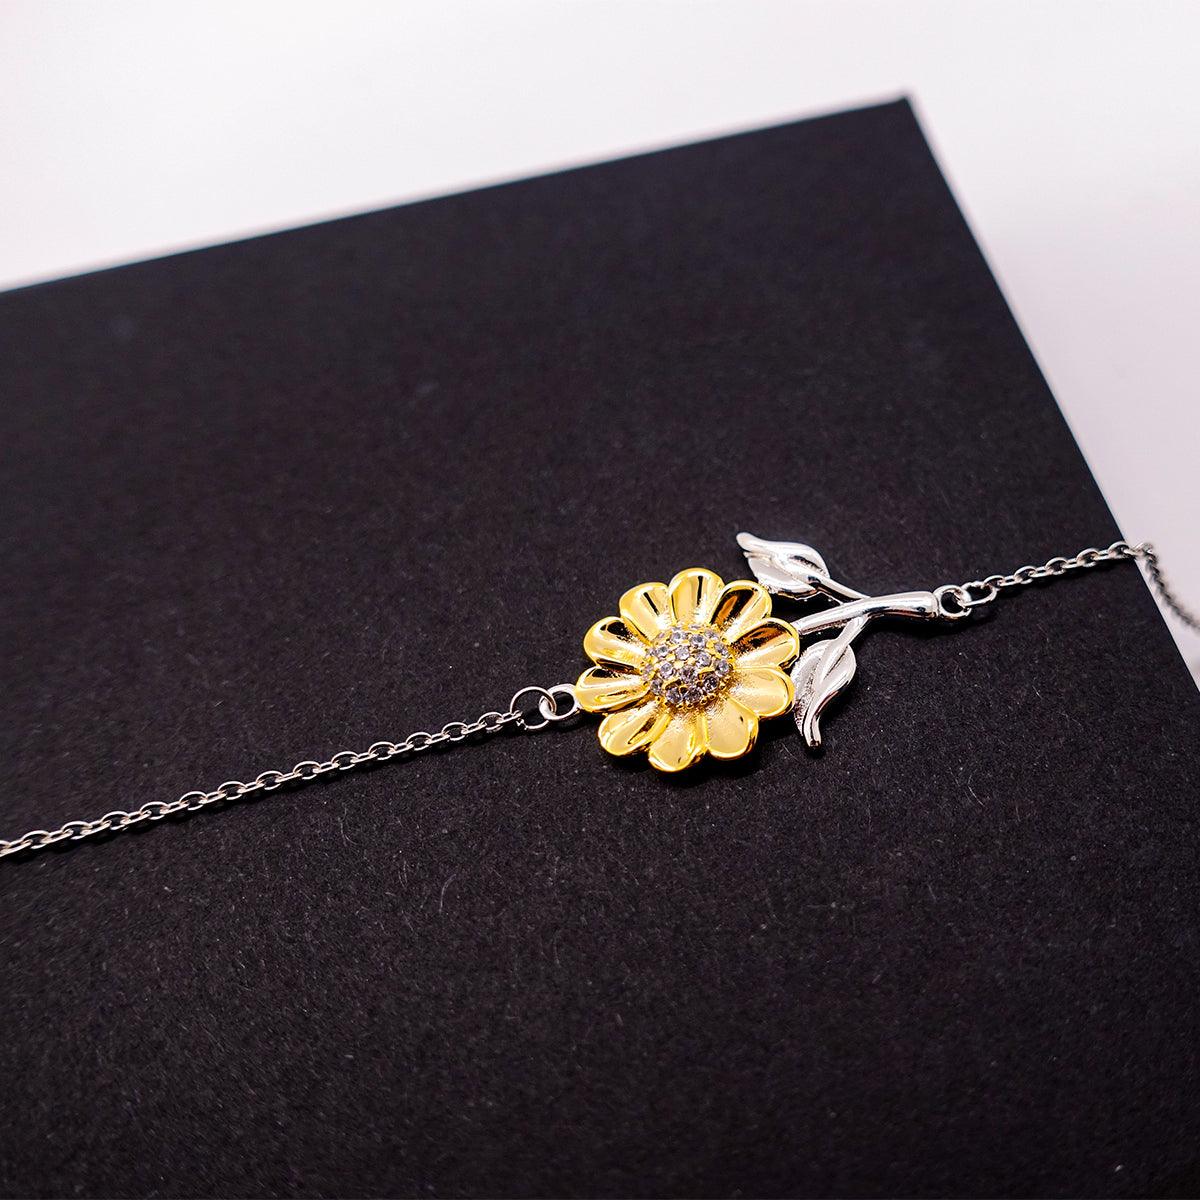 Remarkable Judge Gifts, Your dedication and hard work, Inspirational Birthday Christmas Unique Sunflower Bracelet For Judge, Coworkers, Men, Women, Friends - Mallard Moon Gift Shop